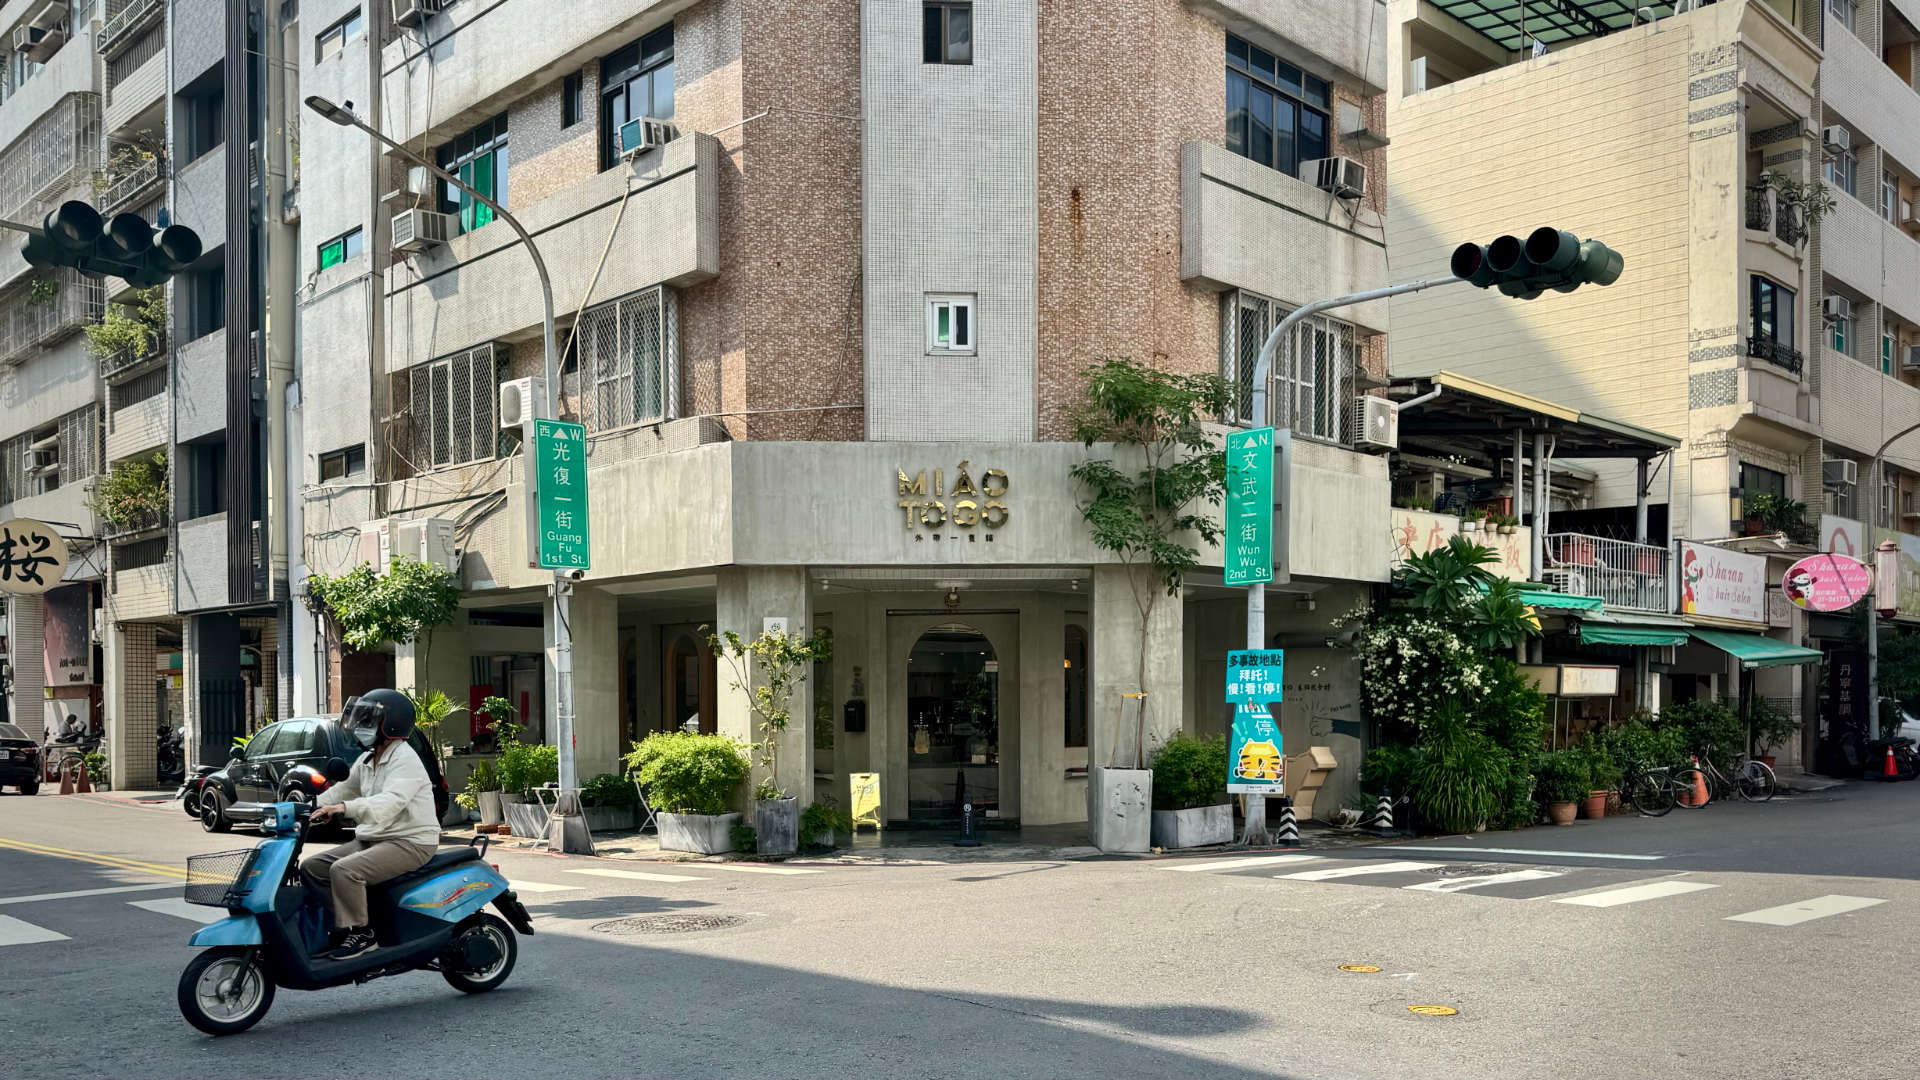 Exterior view of the cornerside ‘Miao To Go’ cat cafe. A woman is driving a scooter past the cafe, which is on the ground floor of a multi-story building on a quiet street corner.